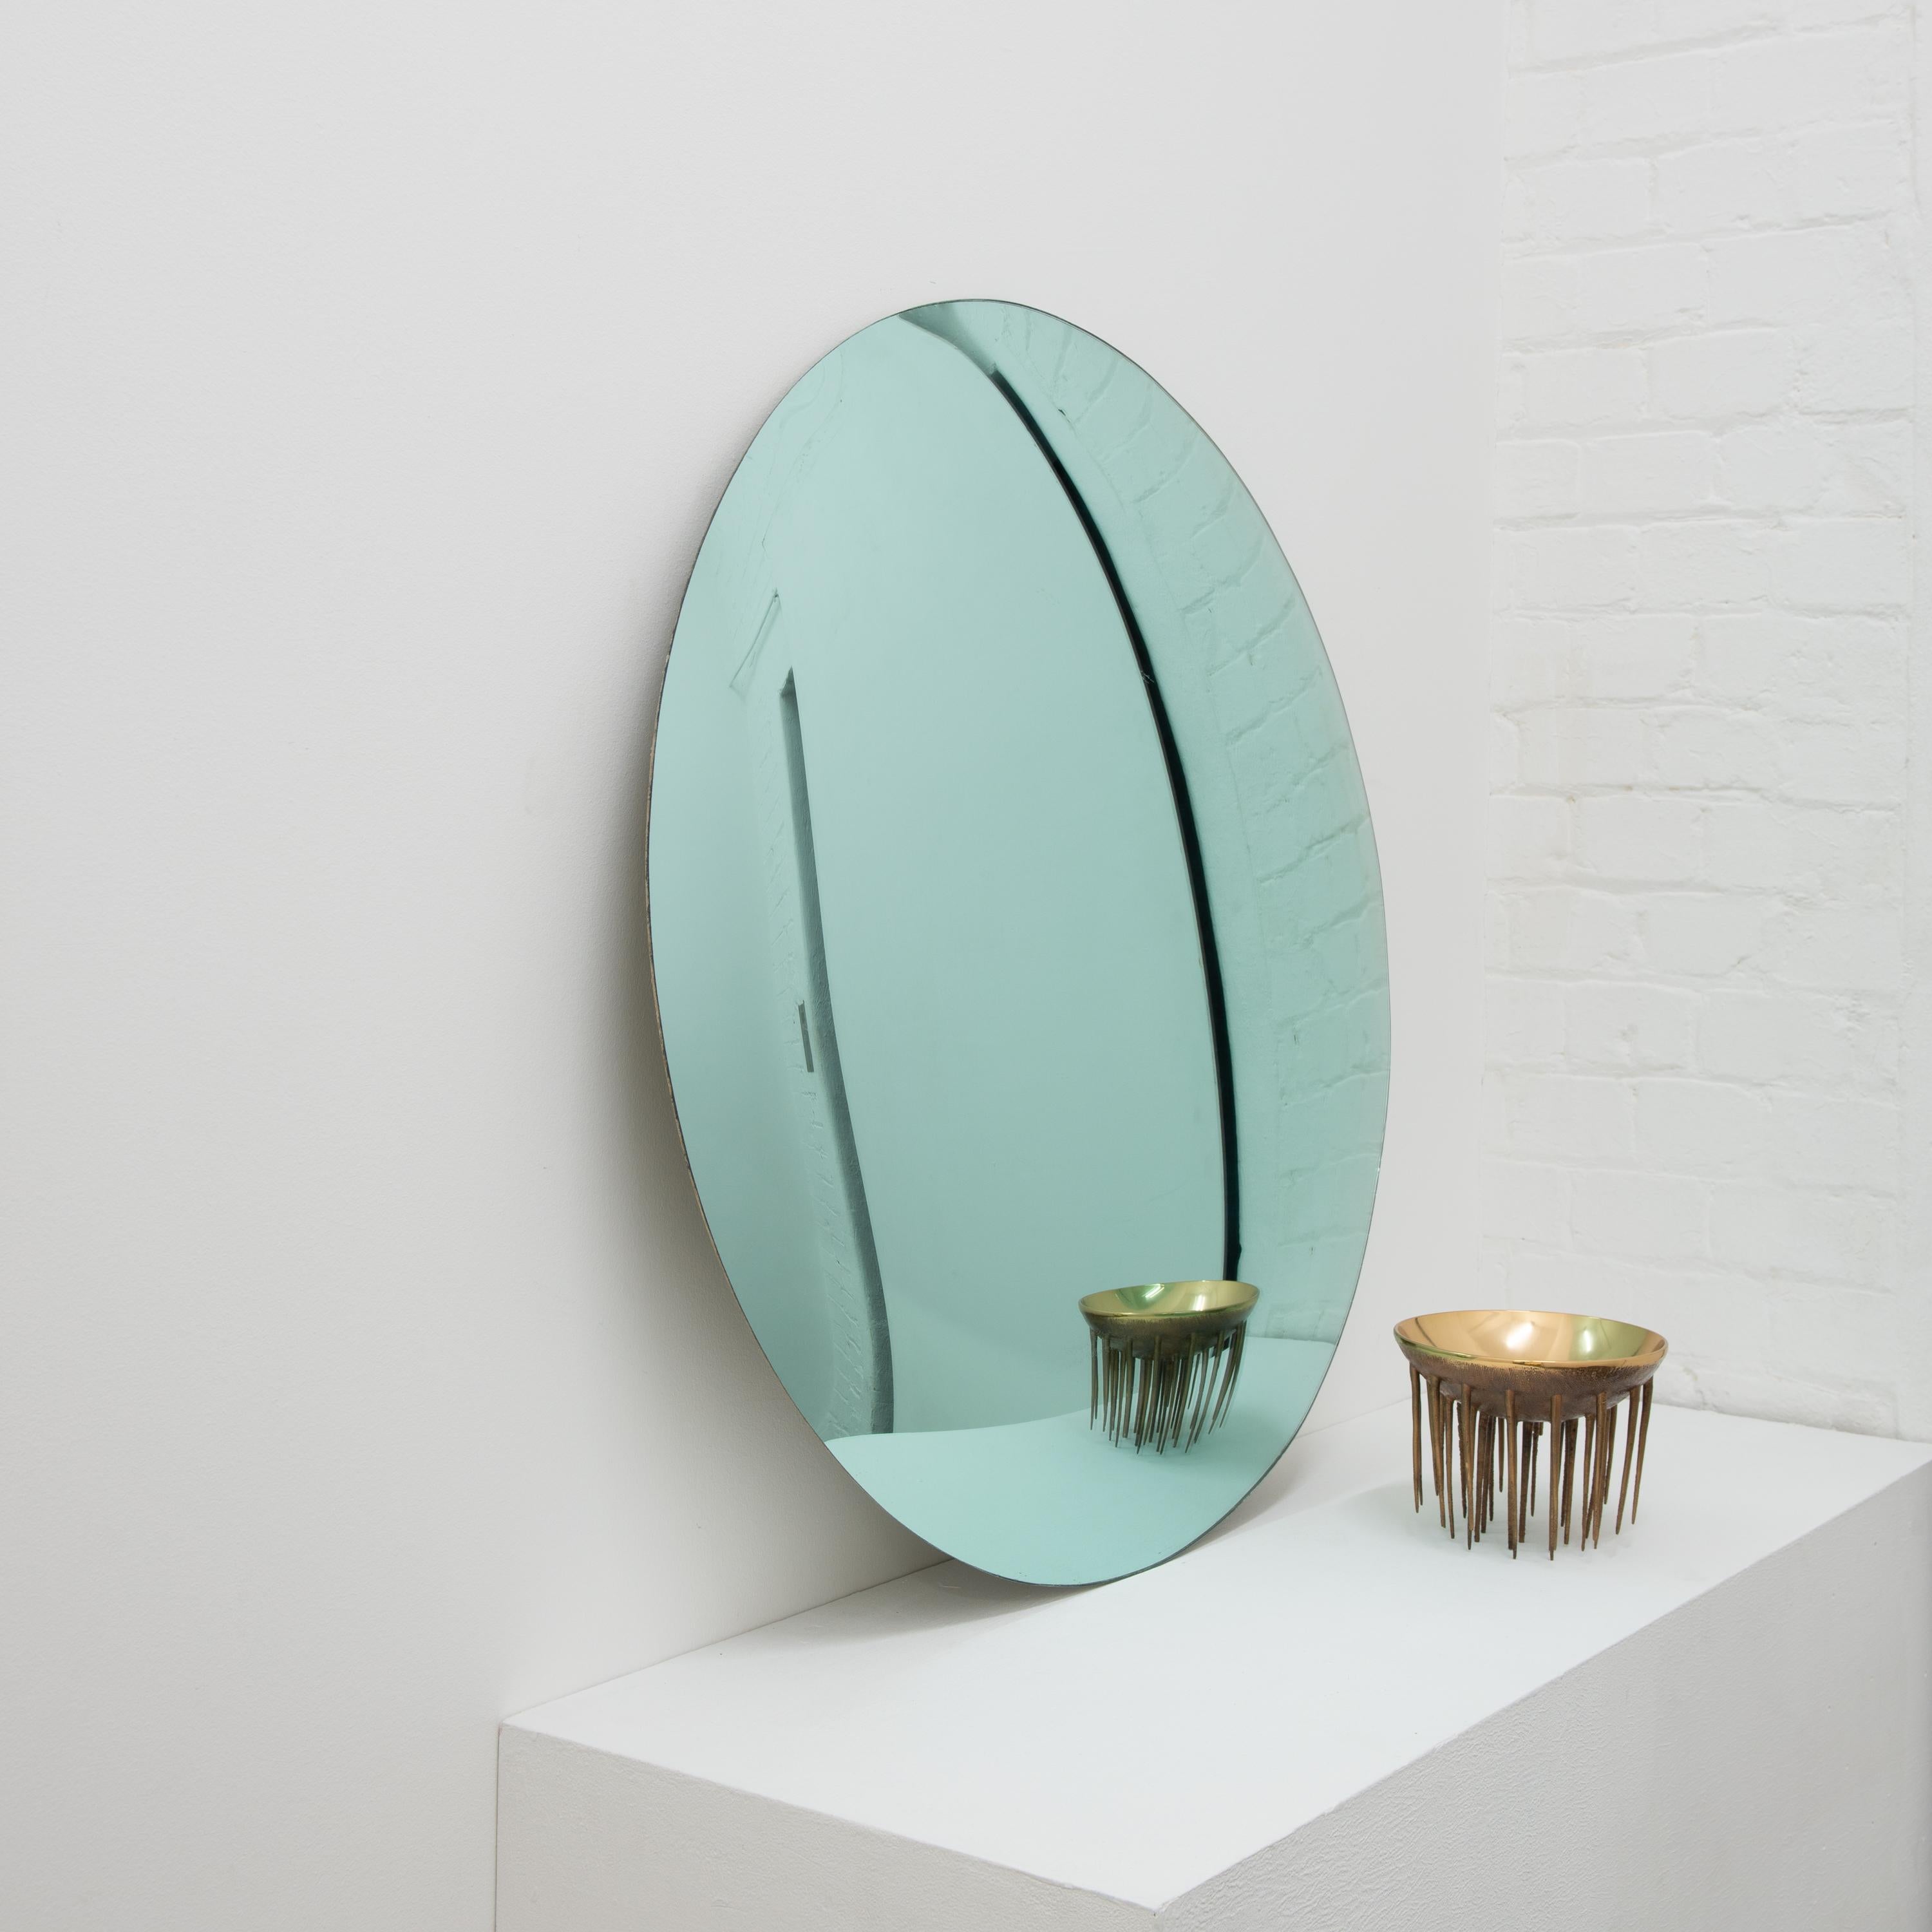 Orbis Convex Green Minimalist Frameless Round Mirror, Large In New Condition For Sale In London, GB